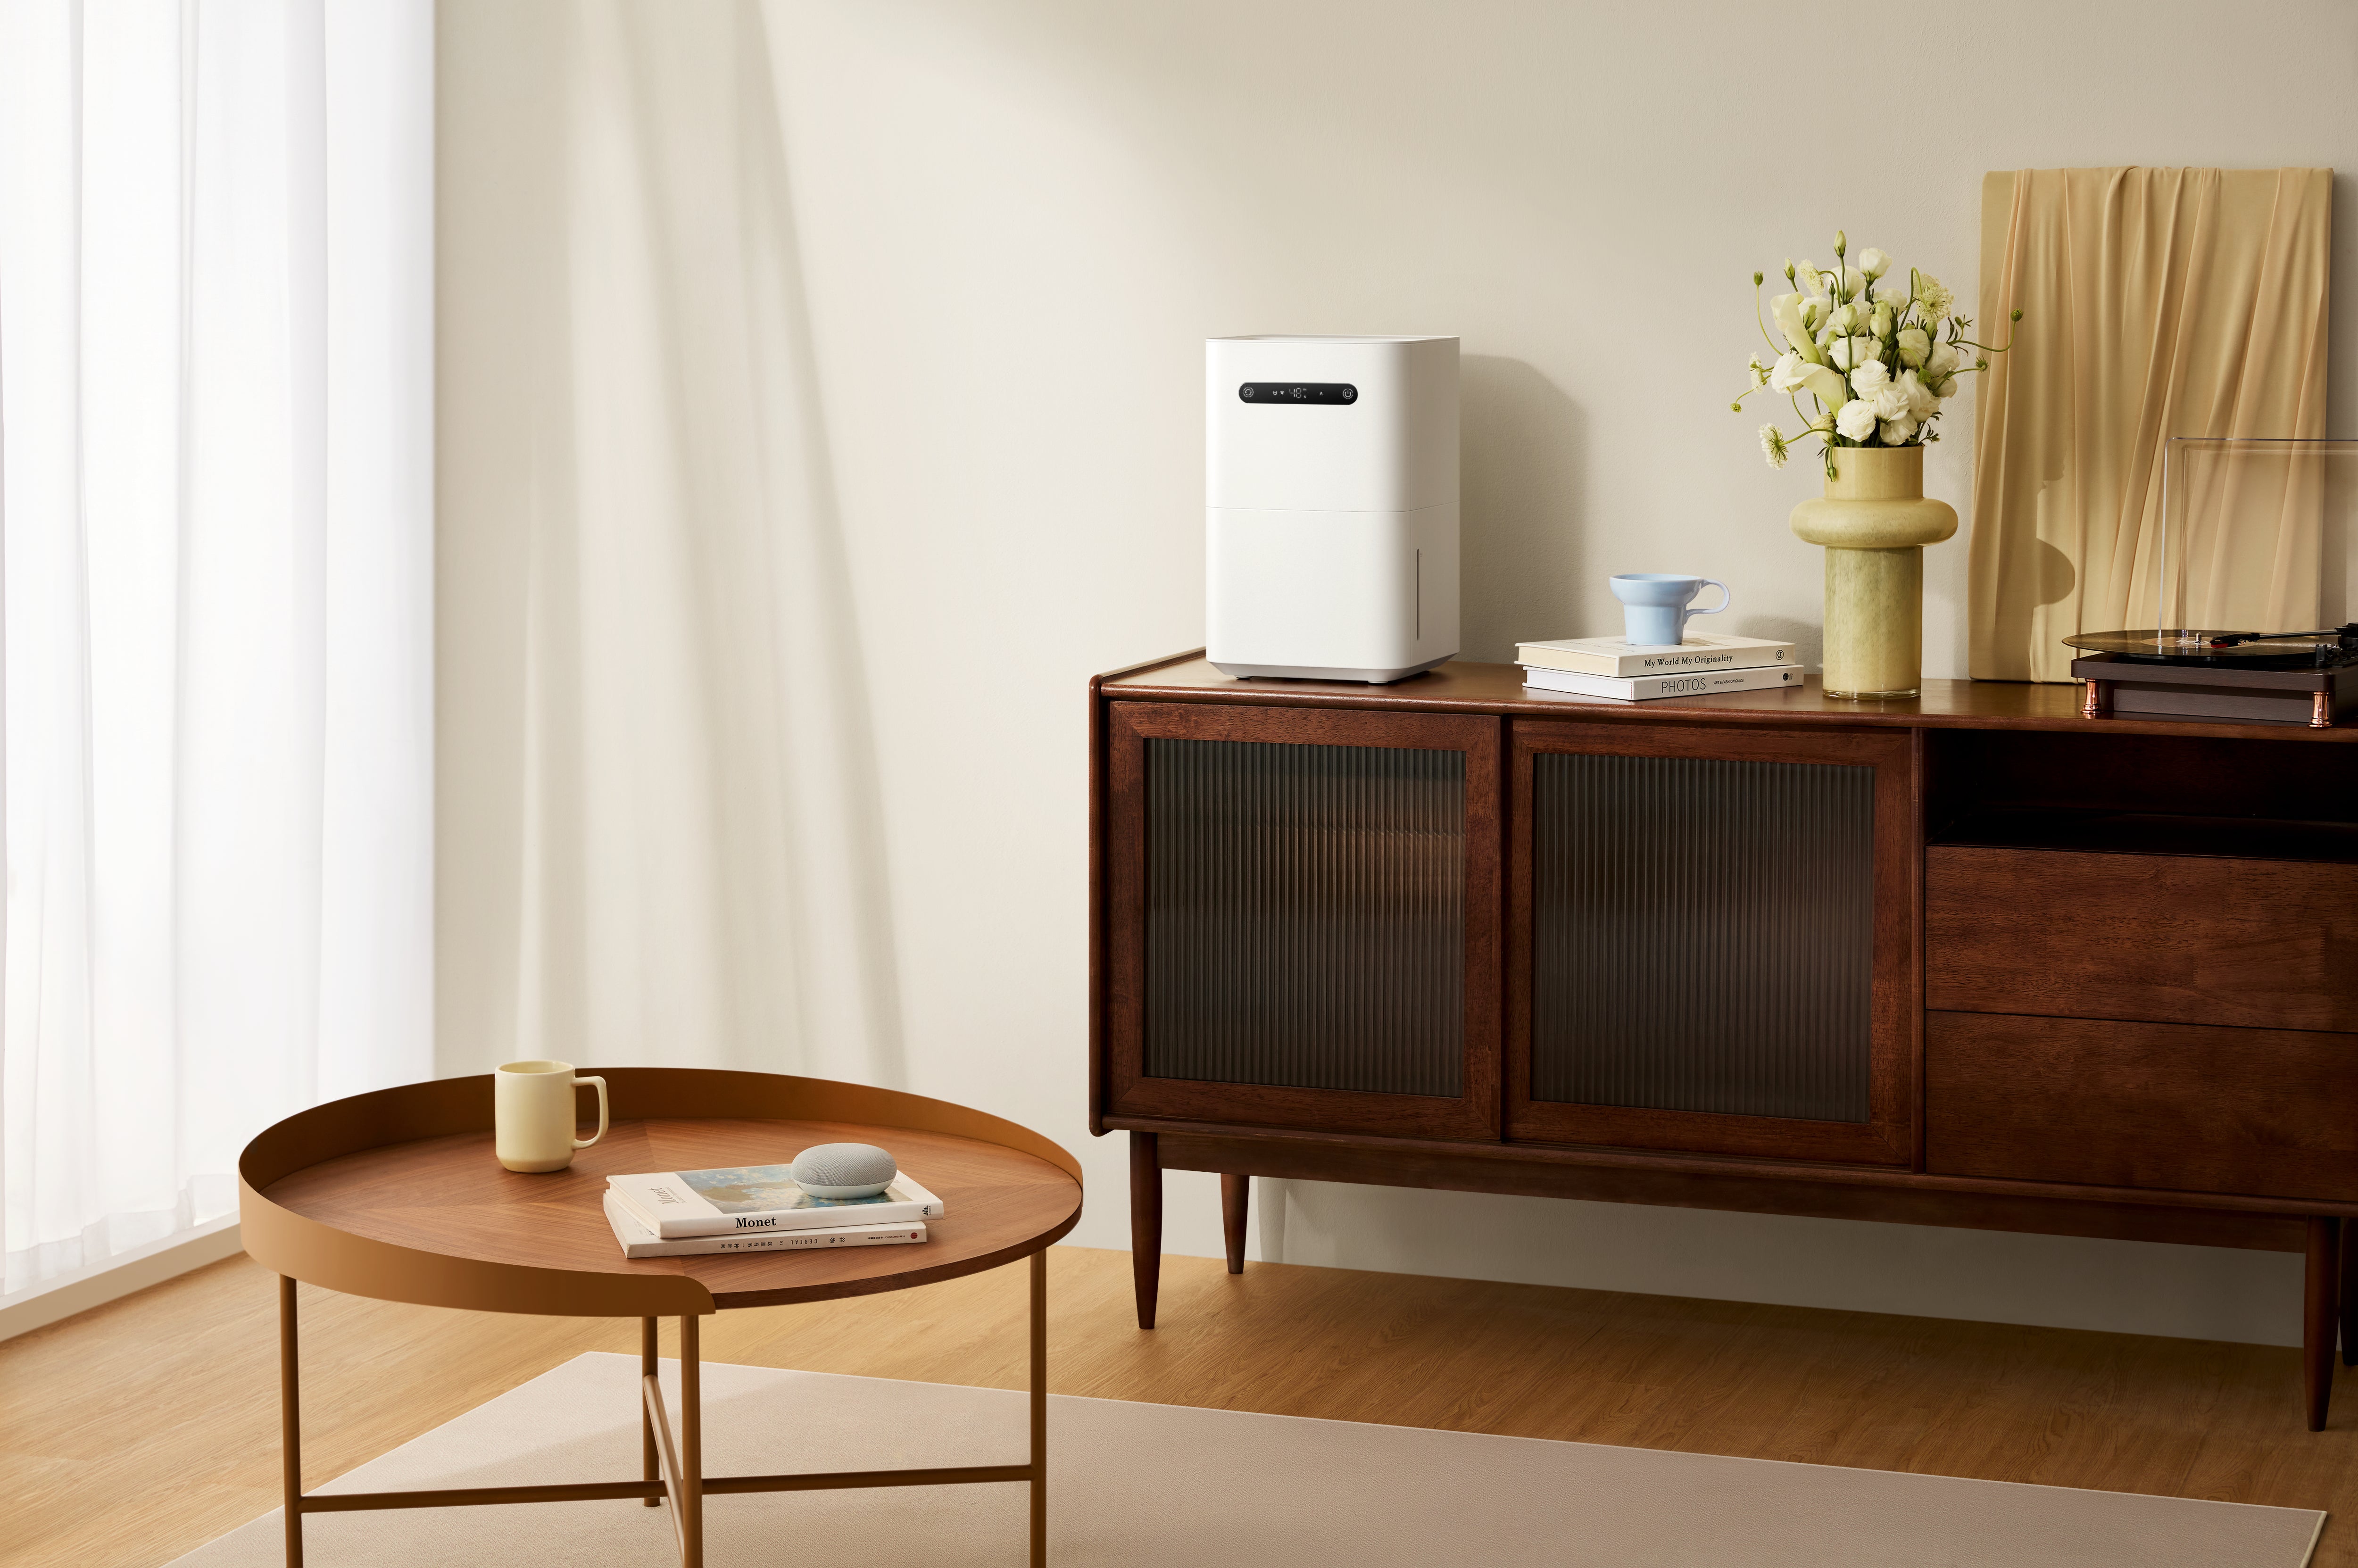 Smartmi Launches Mist-Free Evaporative Humidifier 3 for Whole Home Hydration